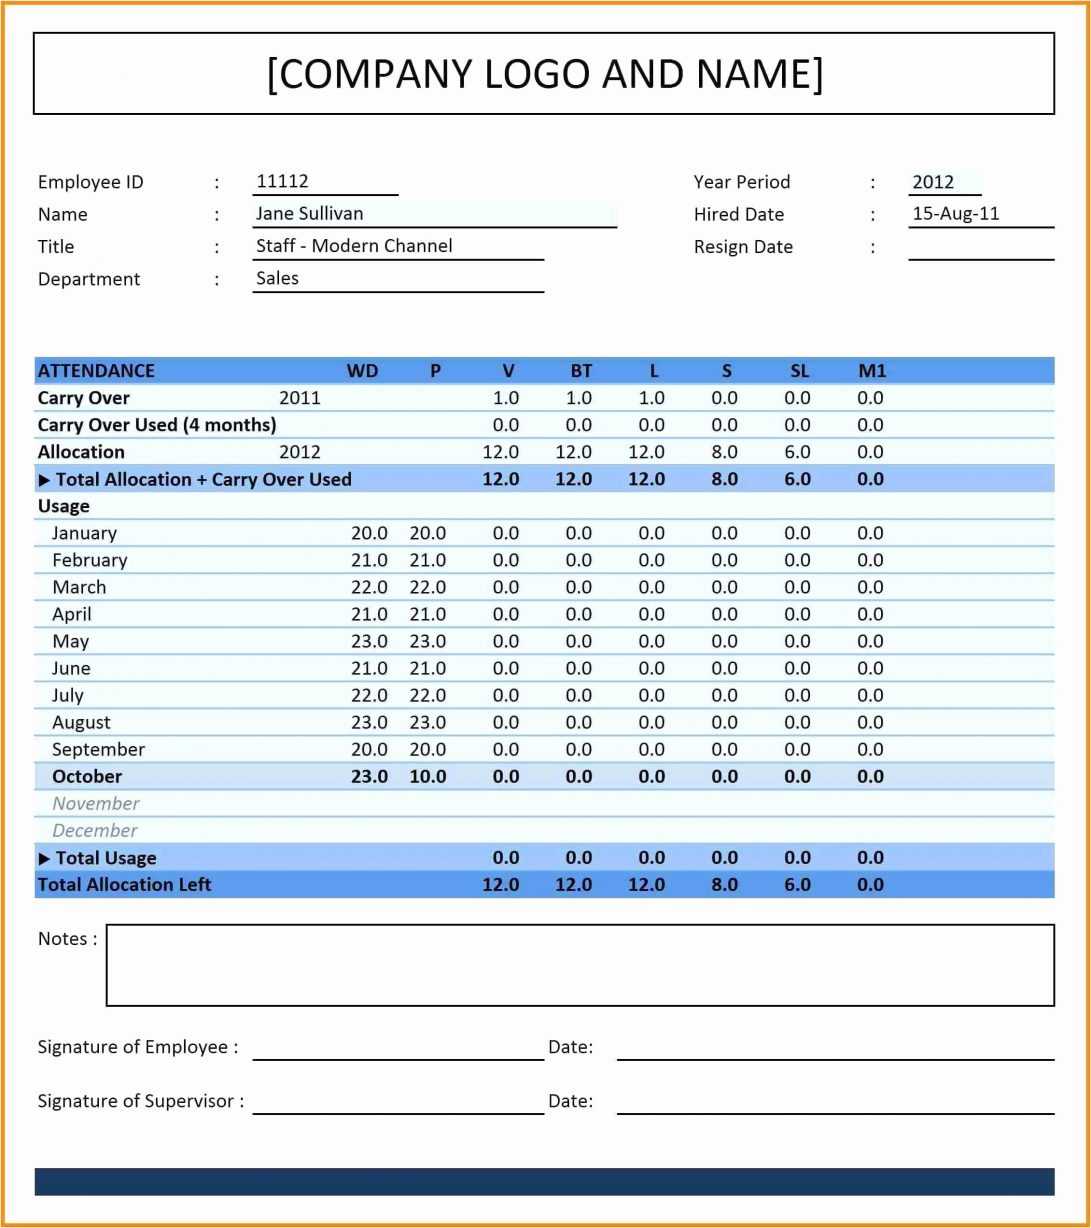 Spreadsheet Sales Analysis Report Example Retail Daily Excel Pertaining To Daily Report Sheet Template